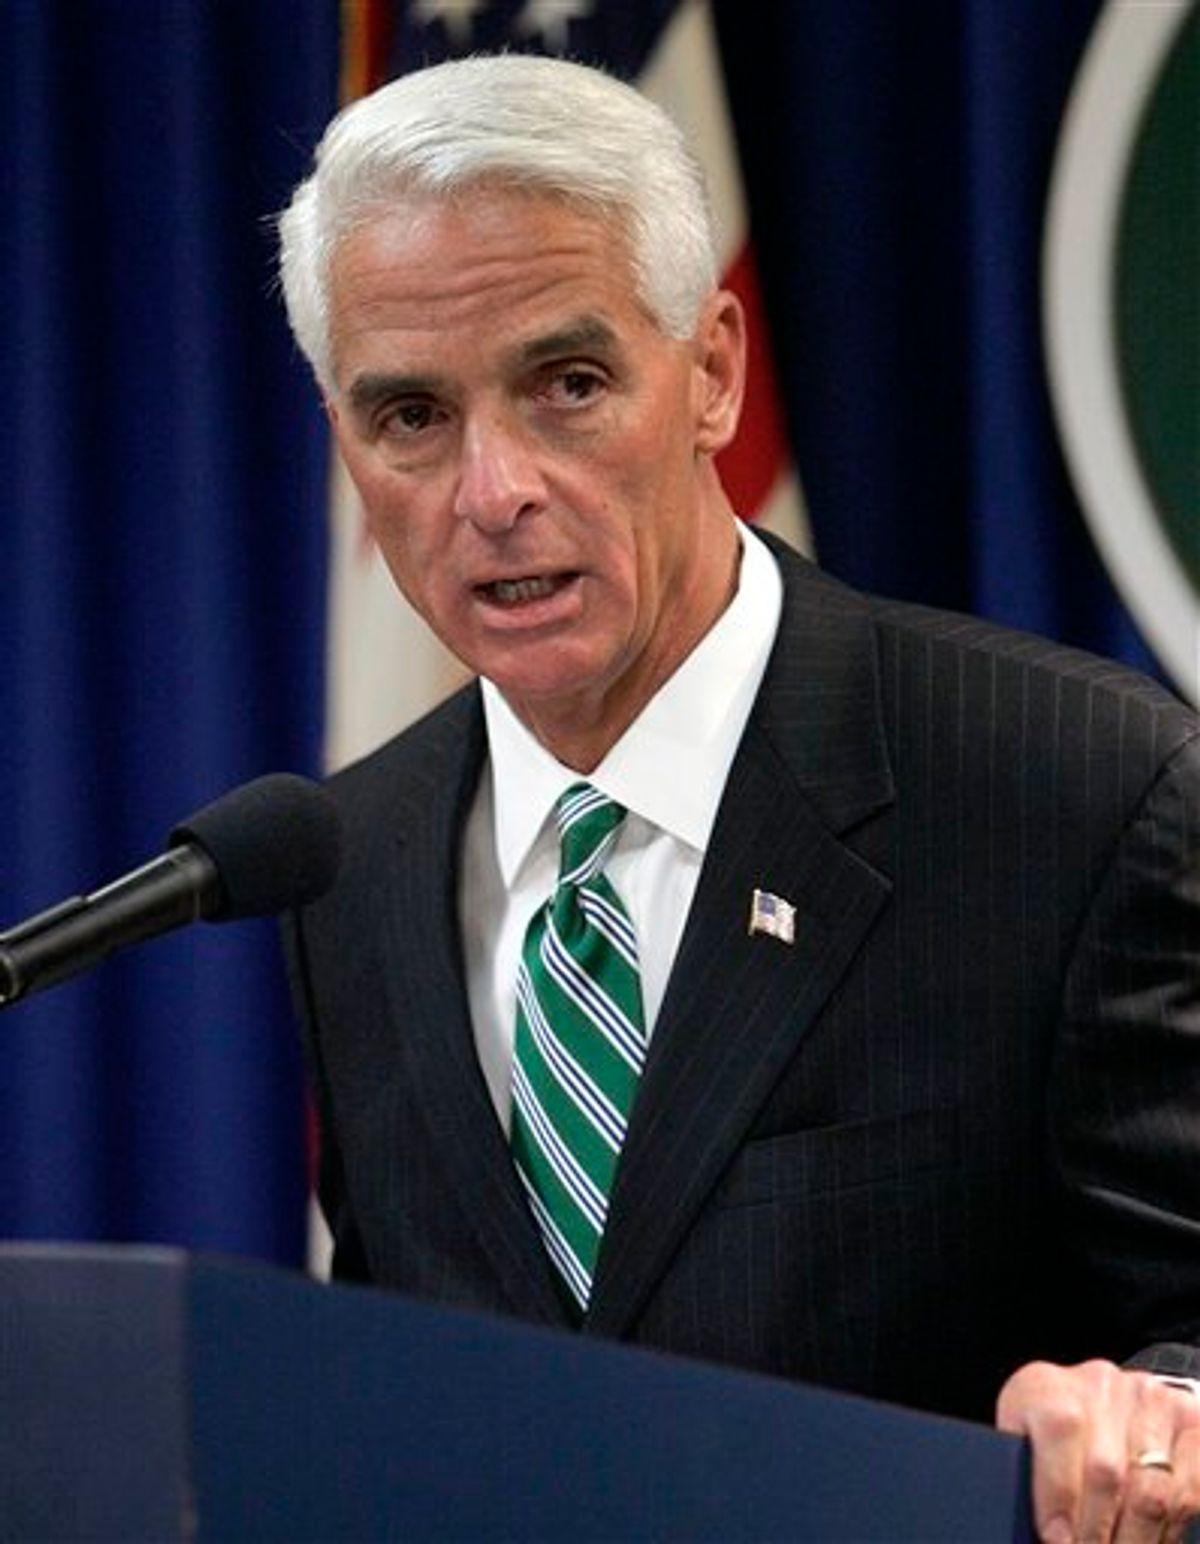 FILE - In this April 15, 2010 file photo, Gov. Charlie Crist speaks in Tallahassee, Fla. Plan A isn't working so well for Gov. Charlie Crist, a former rising Republican star who now trails badly in the Florida Senate primary, but Plans B, C and D don't look much better. His populist approach to governing no longer sits well with angry conservatives who have abandoned him in favor of his primary opponent, former state House speaker Marco Rubio.  (AP Photo/Steve Cannon) (AP)